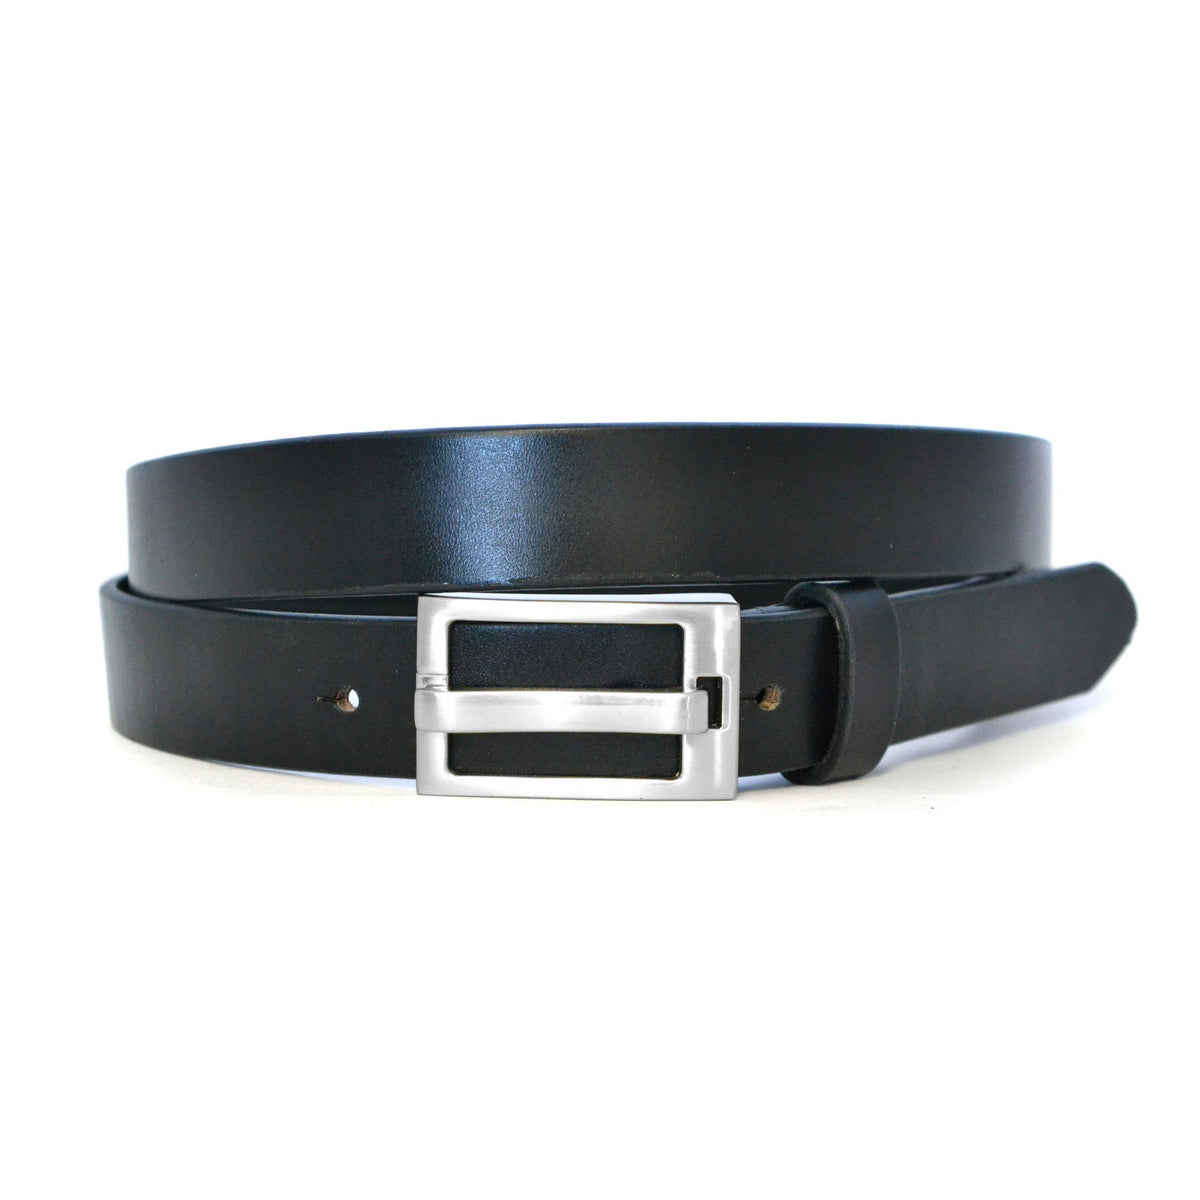 DARCY - Mens Black Leather Belt freeshipping - BeltNBags